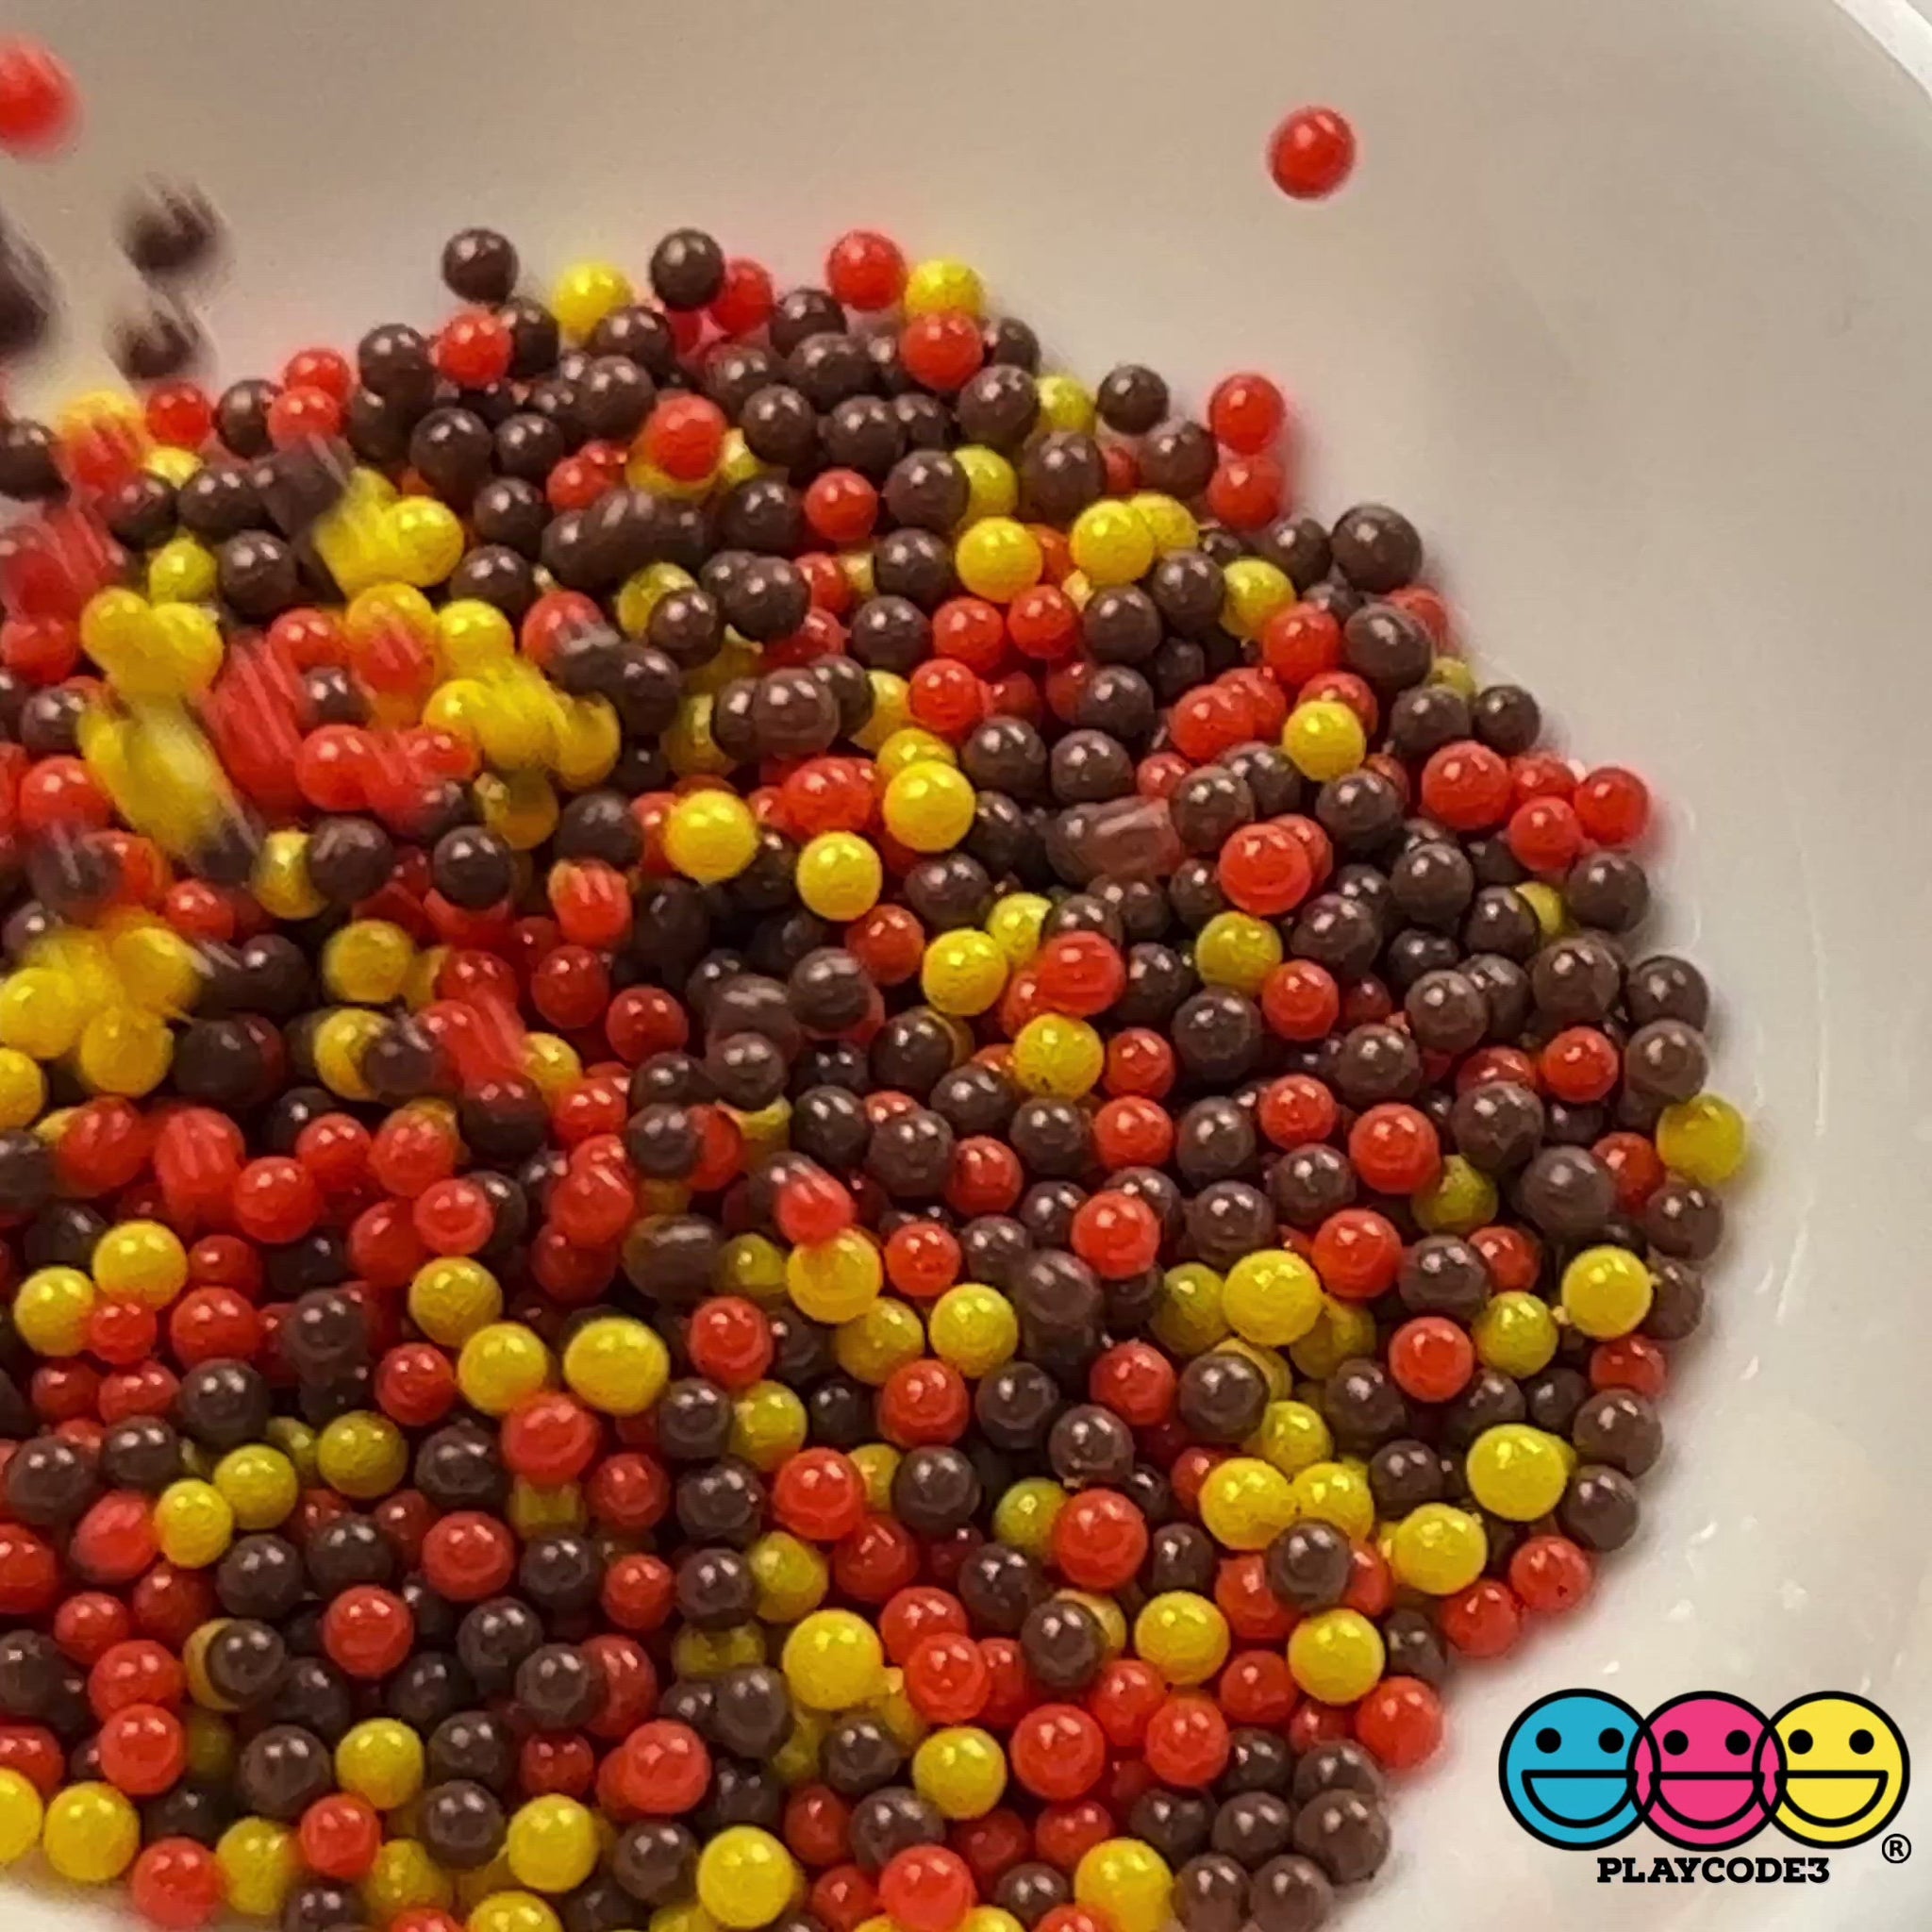 20/100g 1mm Nonpareil Caviar Glass Beads Faux Sprinkles Decoden Funfetti  Jimmies Resin 18 Colors - PLAYCODE3 LLC